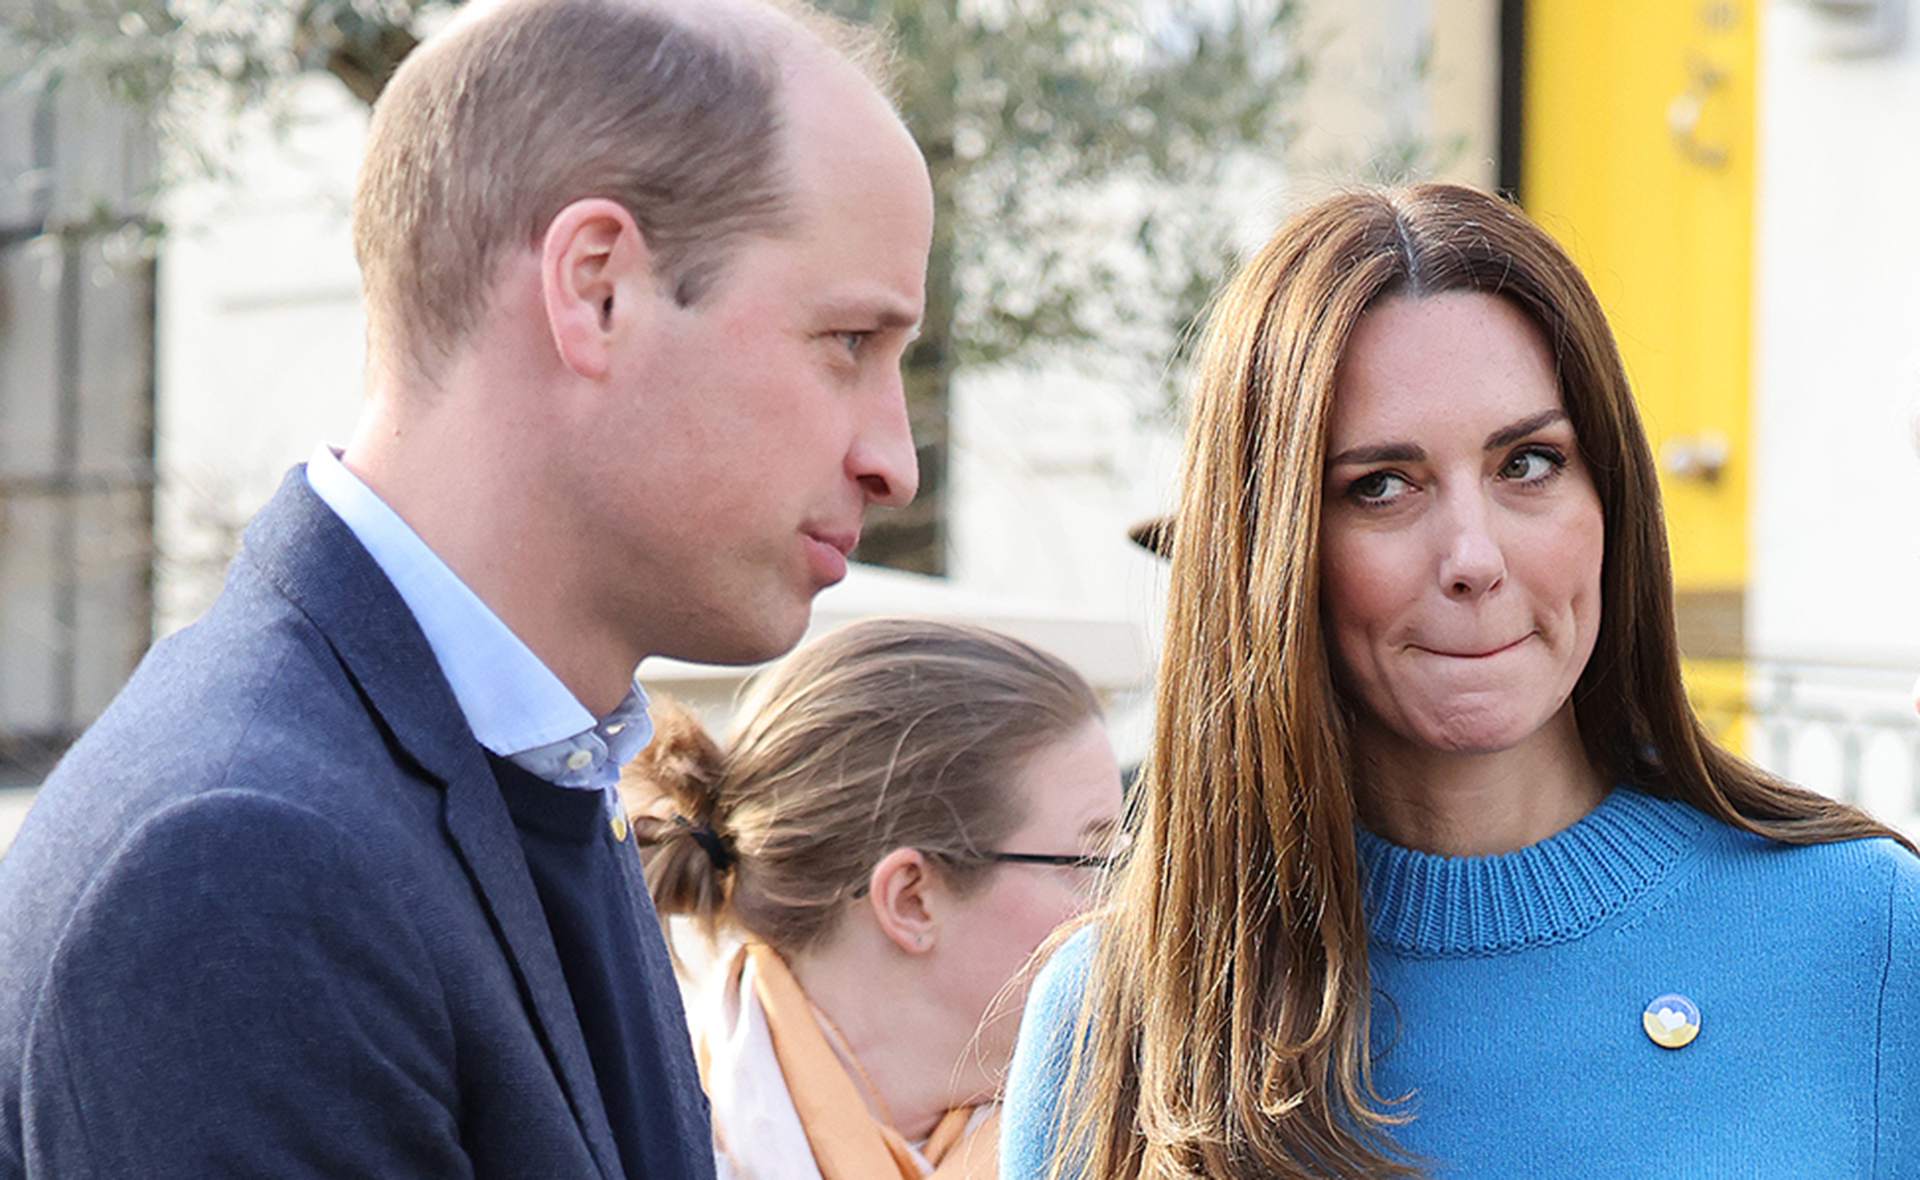 Did Prince William really make this controversial remark that sparked international backlash?